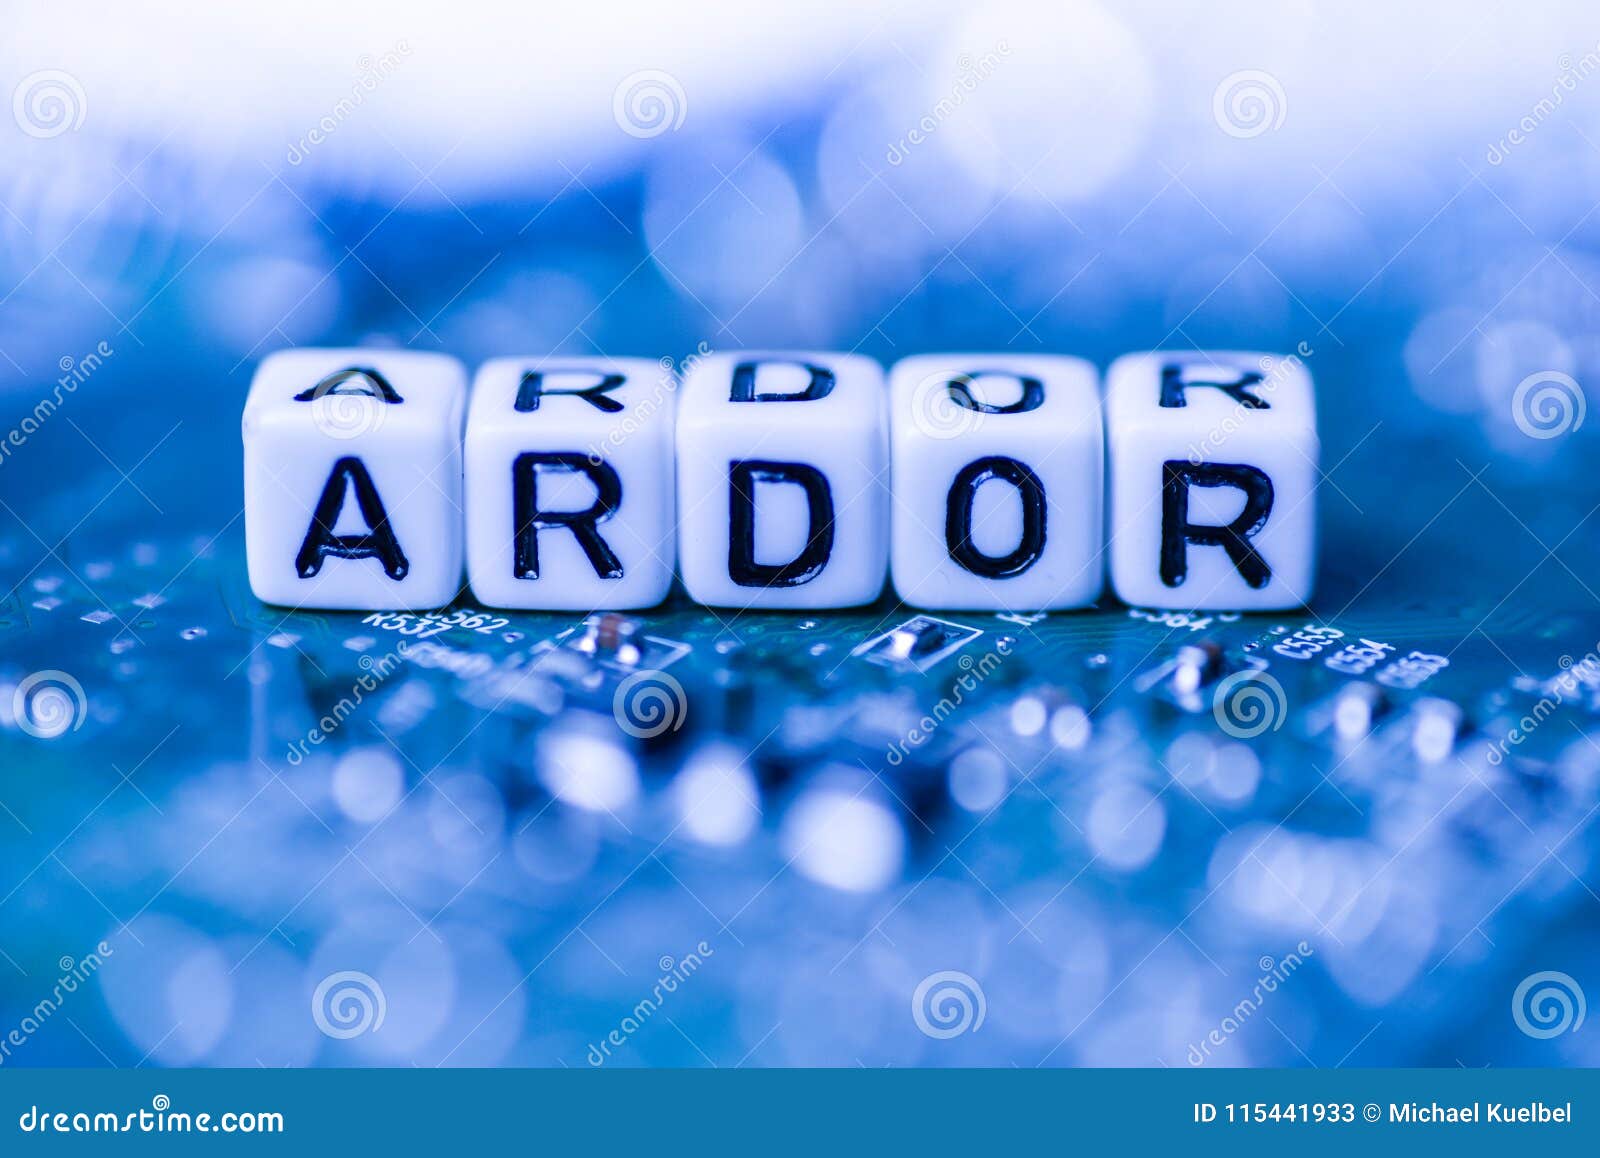 word ardor formed by alphabet blocks on mother cryptocurrency